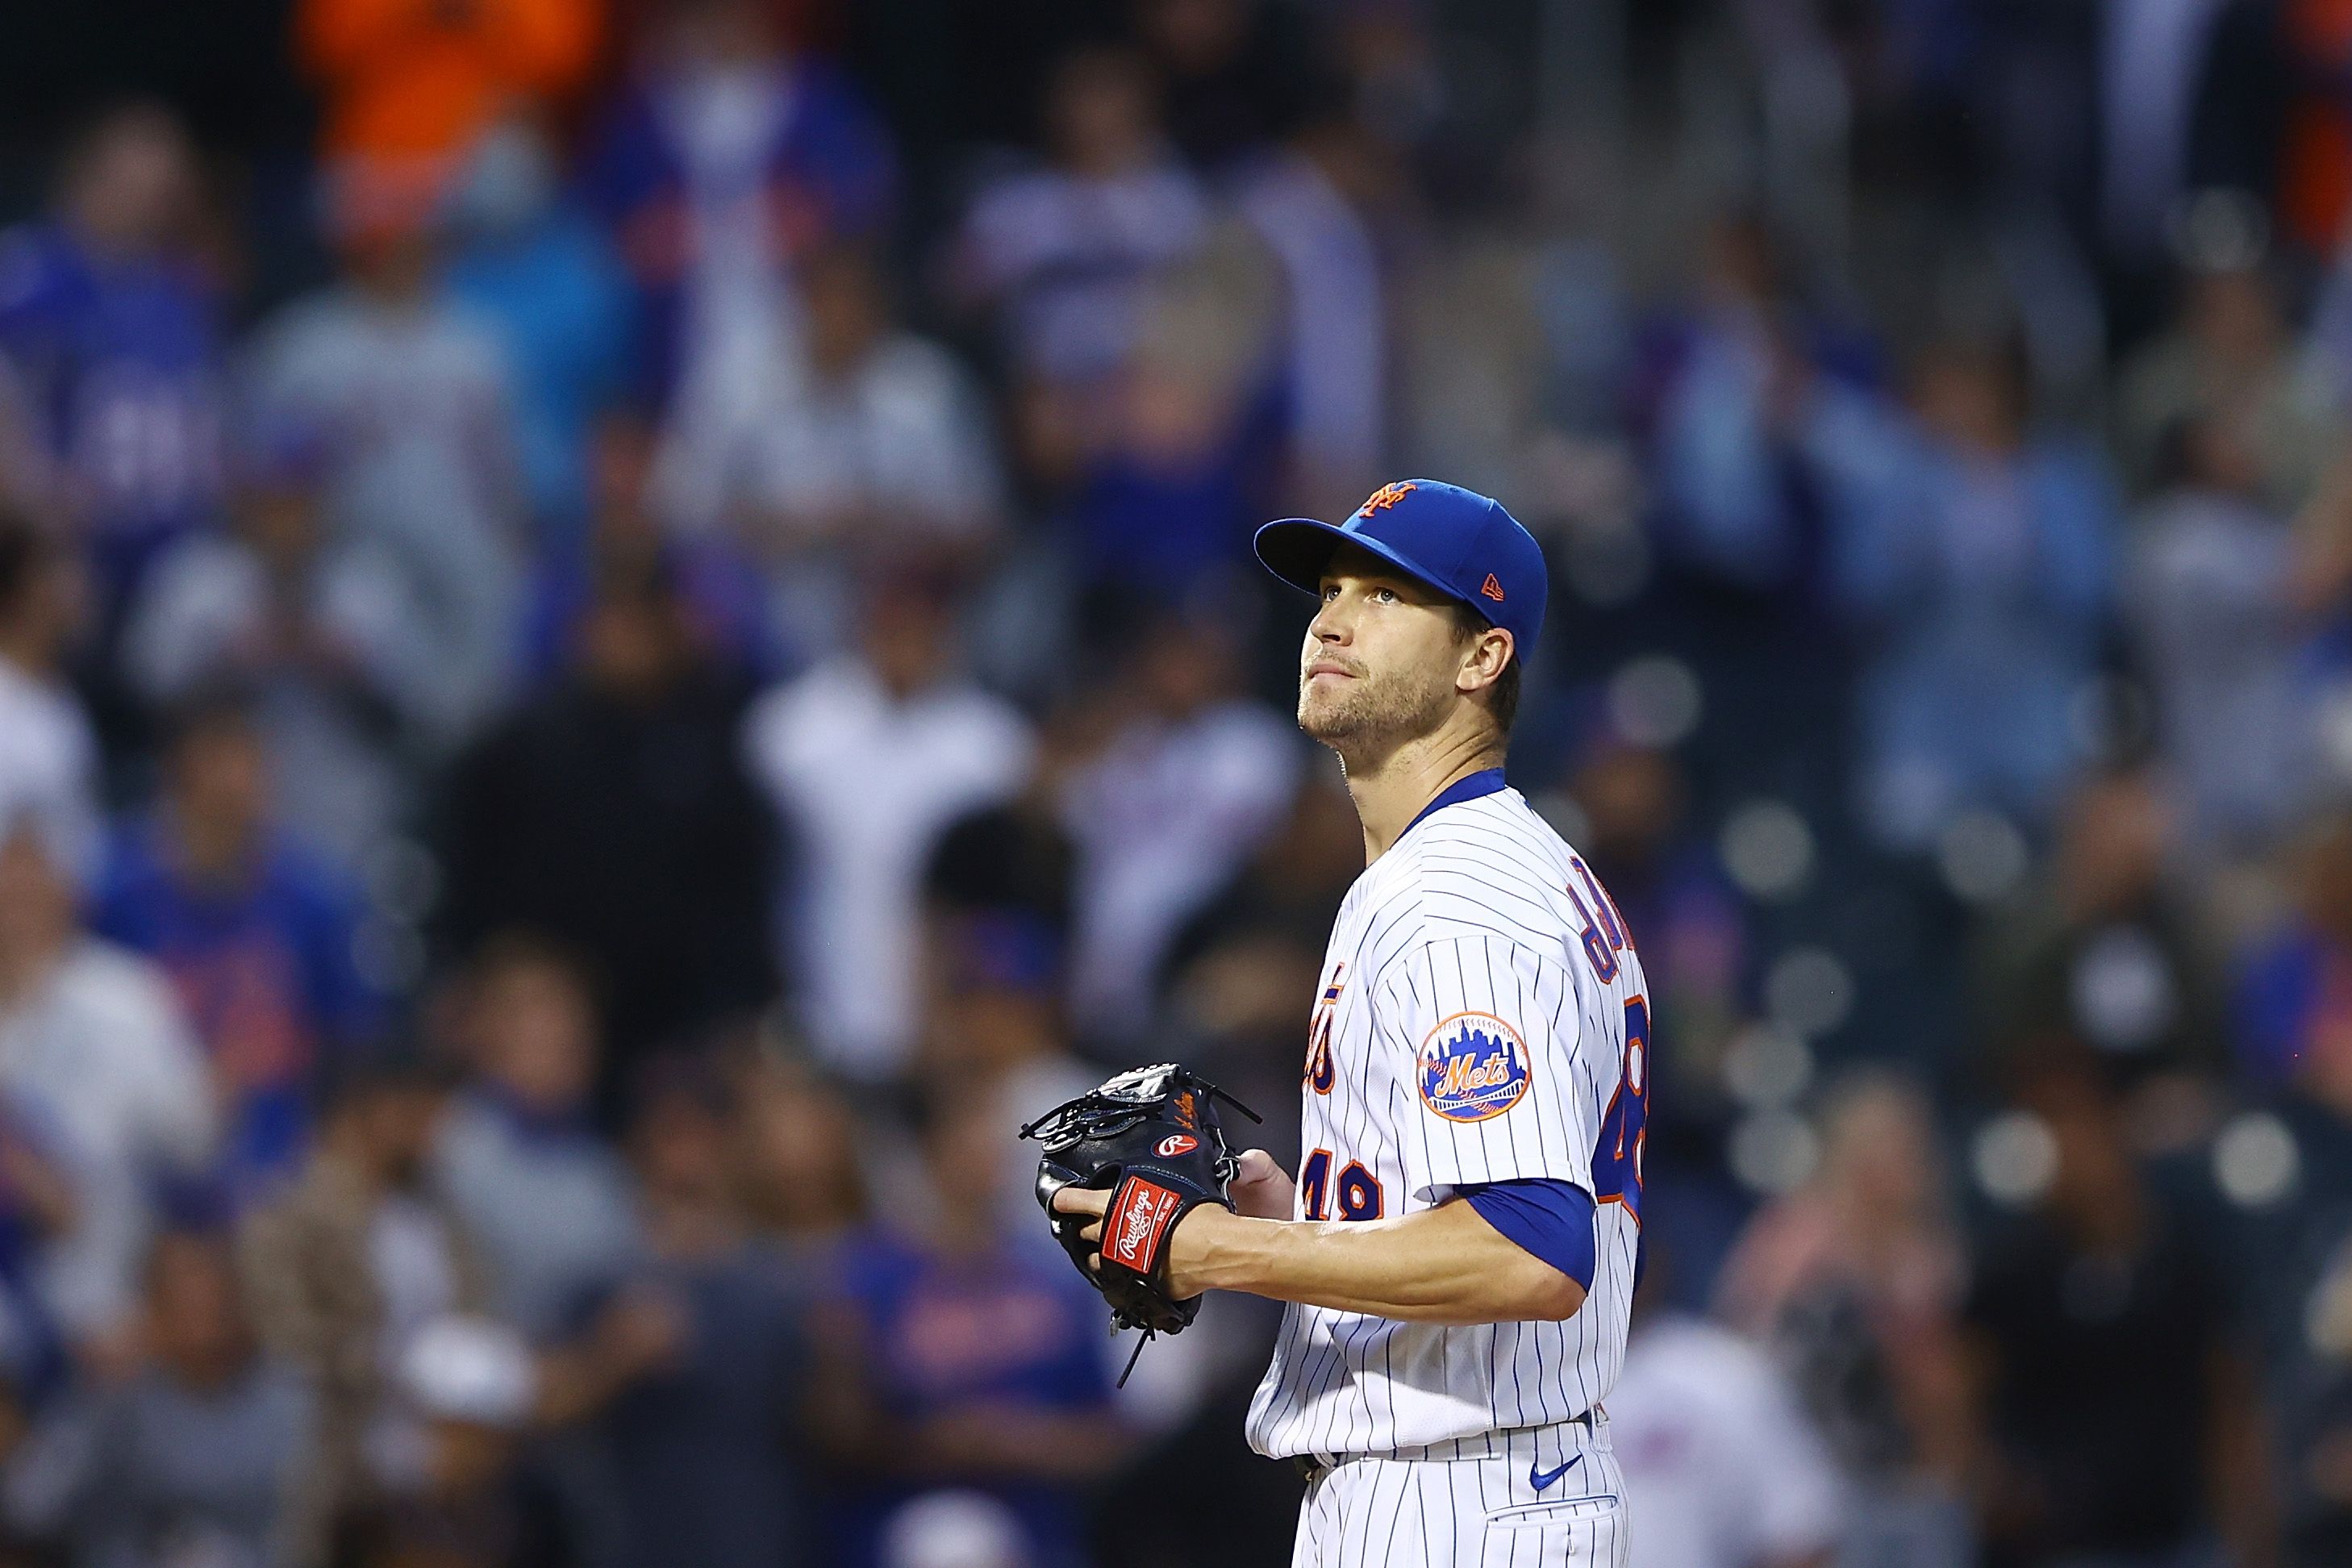 The Only Thing That Can Stop Jacob deGrom Is Jacob deGrom